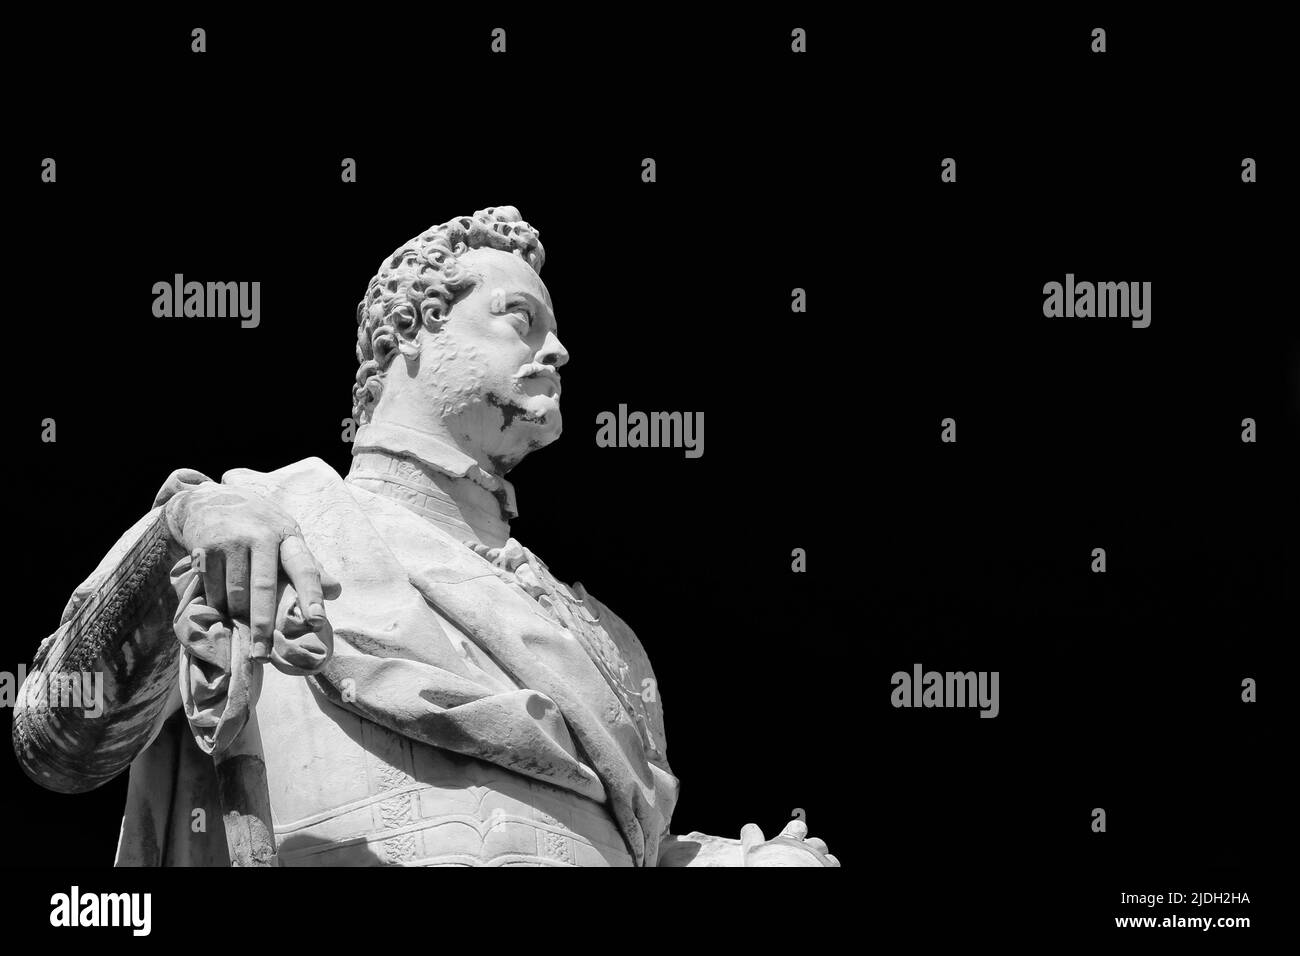 Ferdinando I Medici, Grand Duke of Tuscany. A marble statue erected in 1594 in the historical center of Pisa (Black and White with copy space) Stock Photo